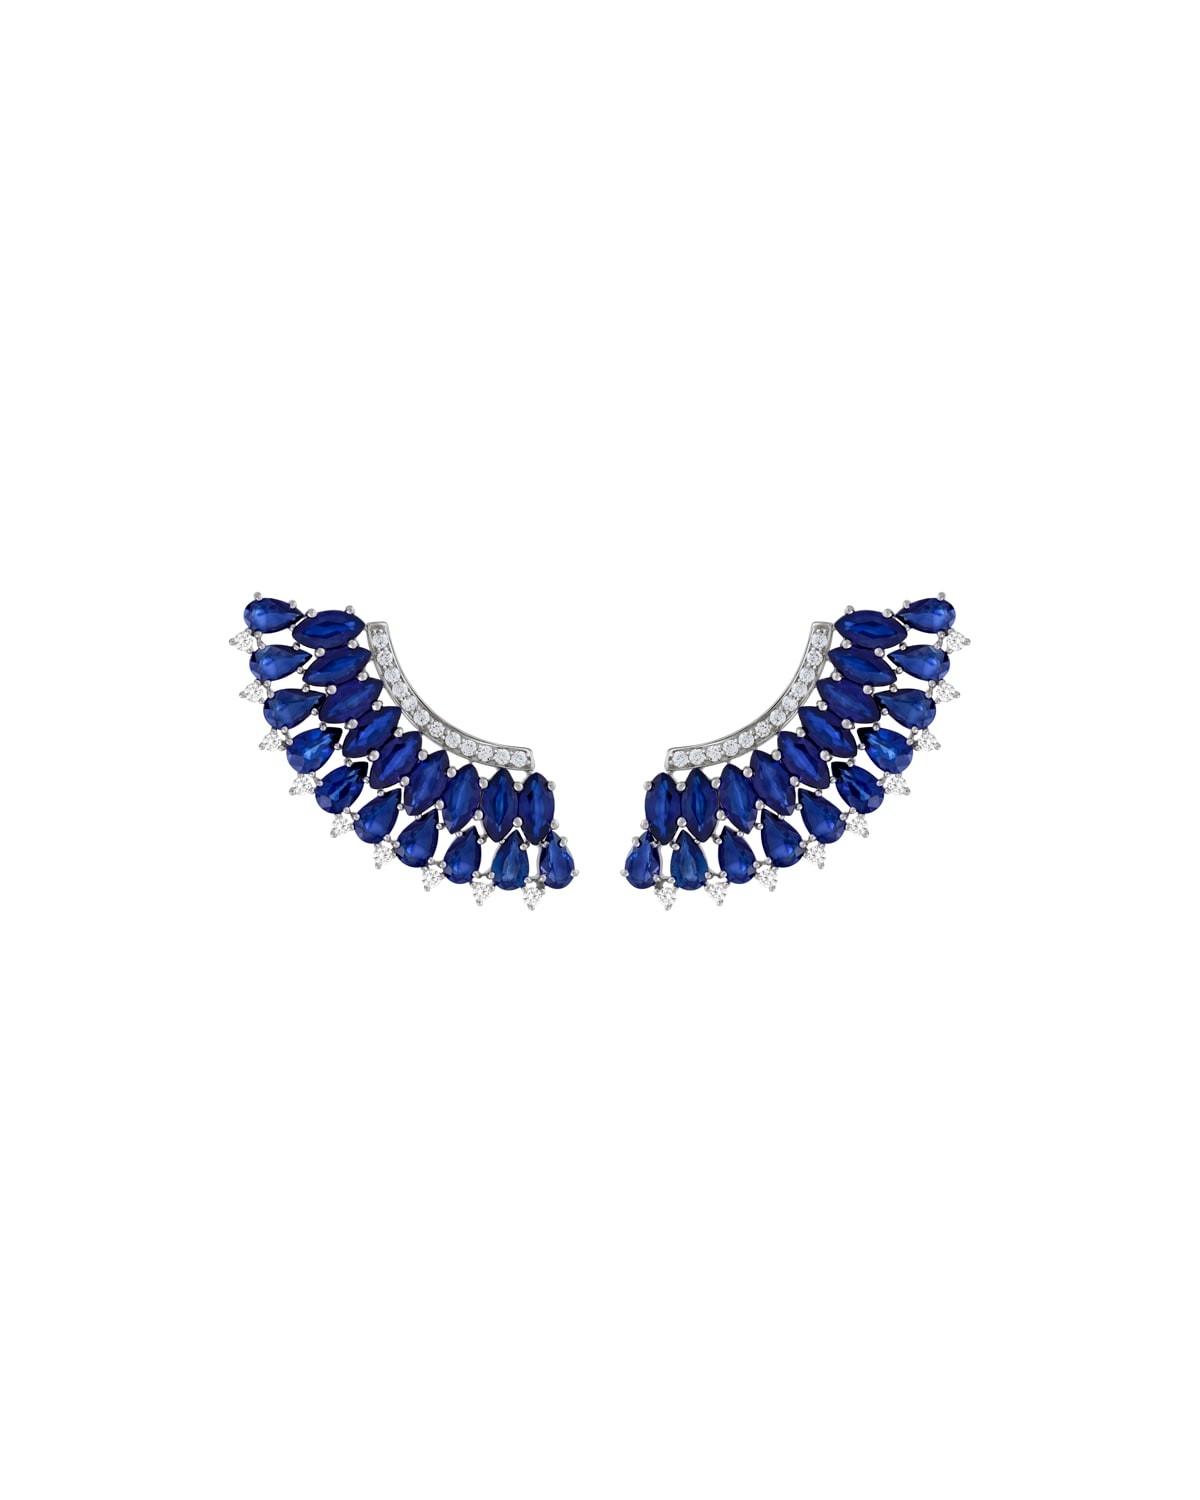 Mirage 18k White Gold Blue Sapphire and Diamond Pave Earrings